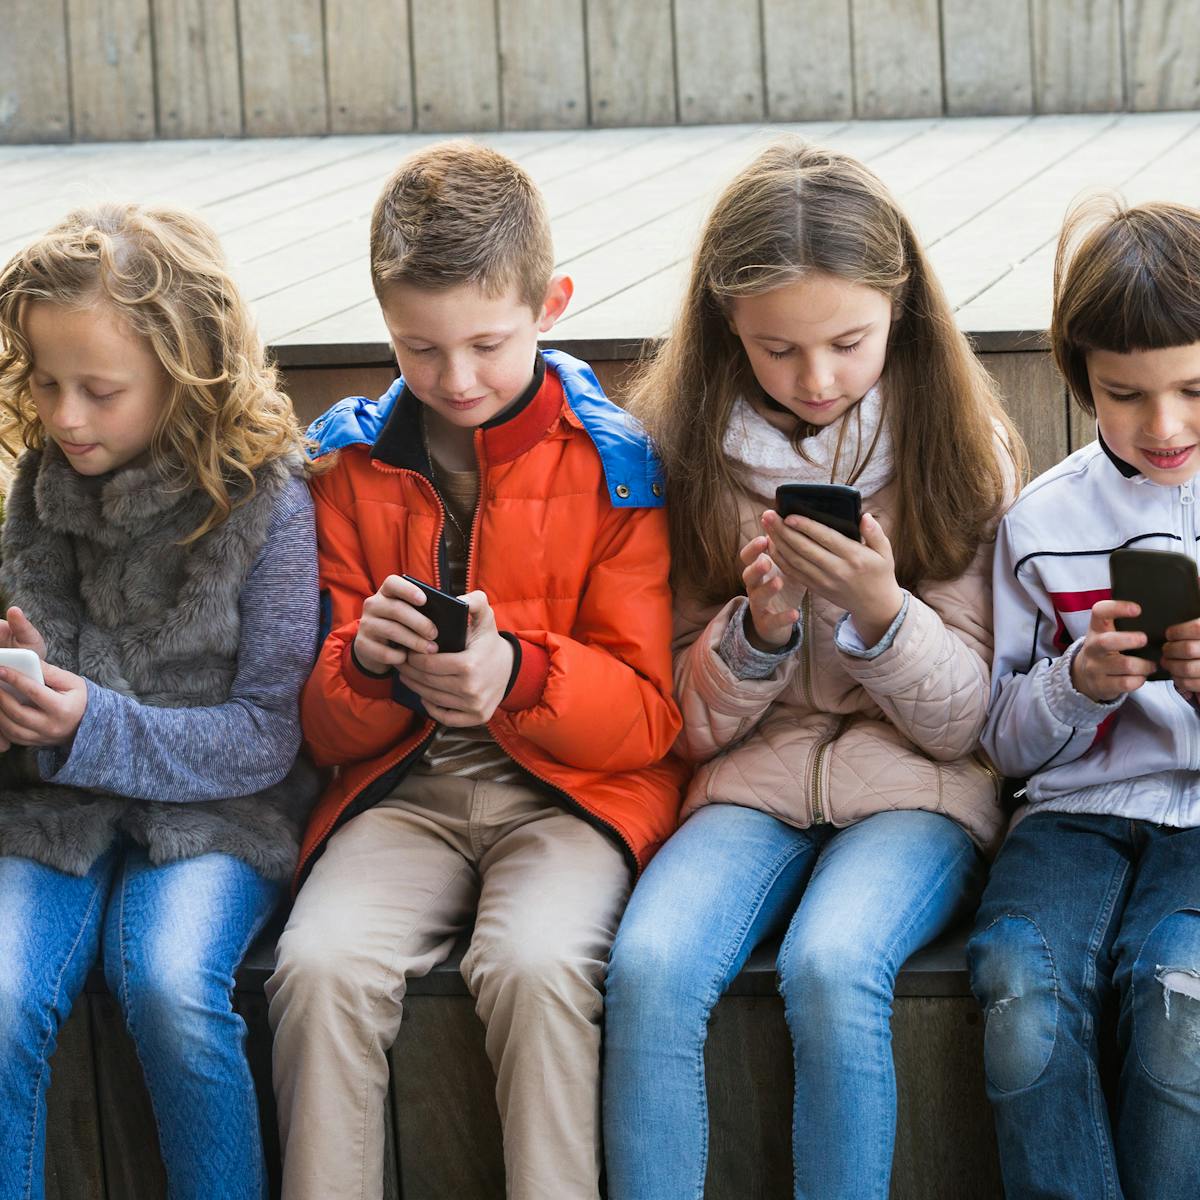 When it comes to kids and social media, it's not all bad news